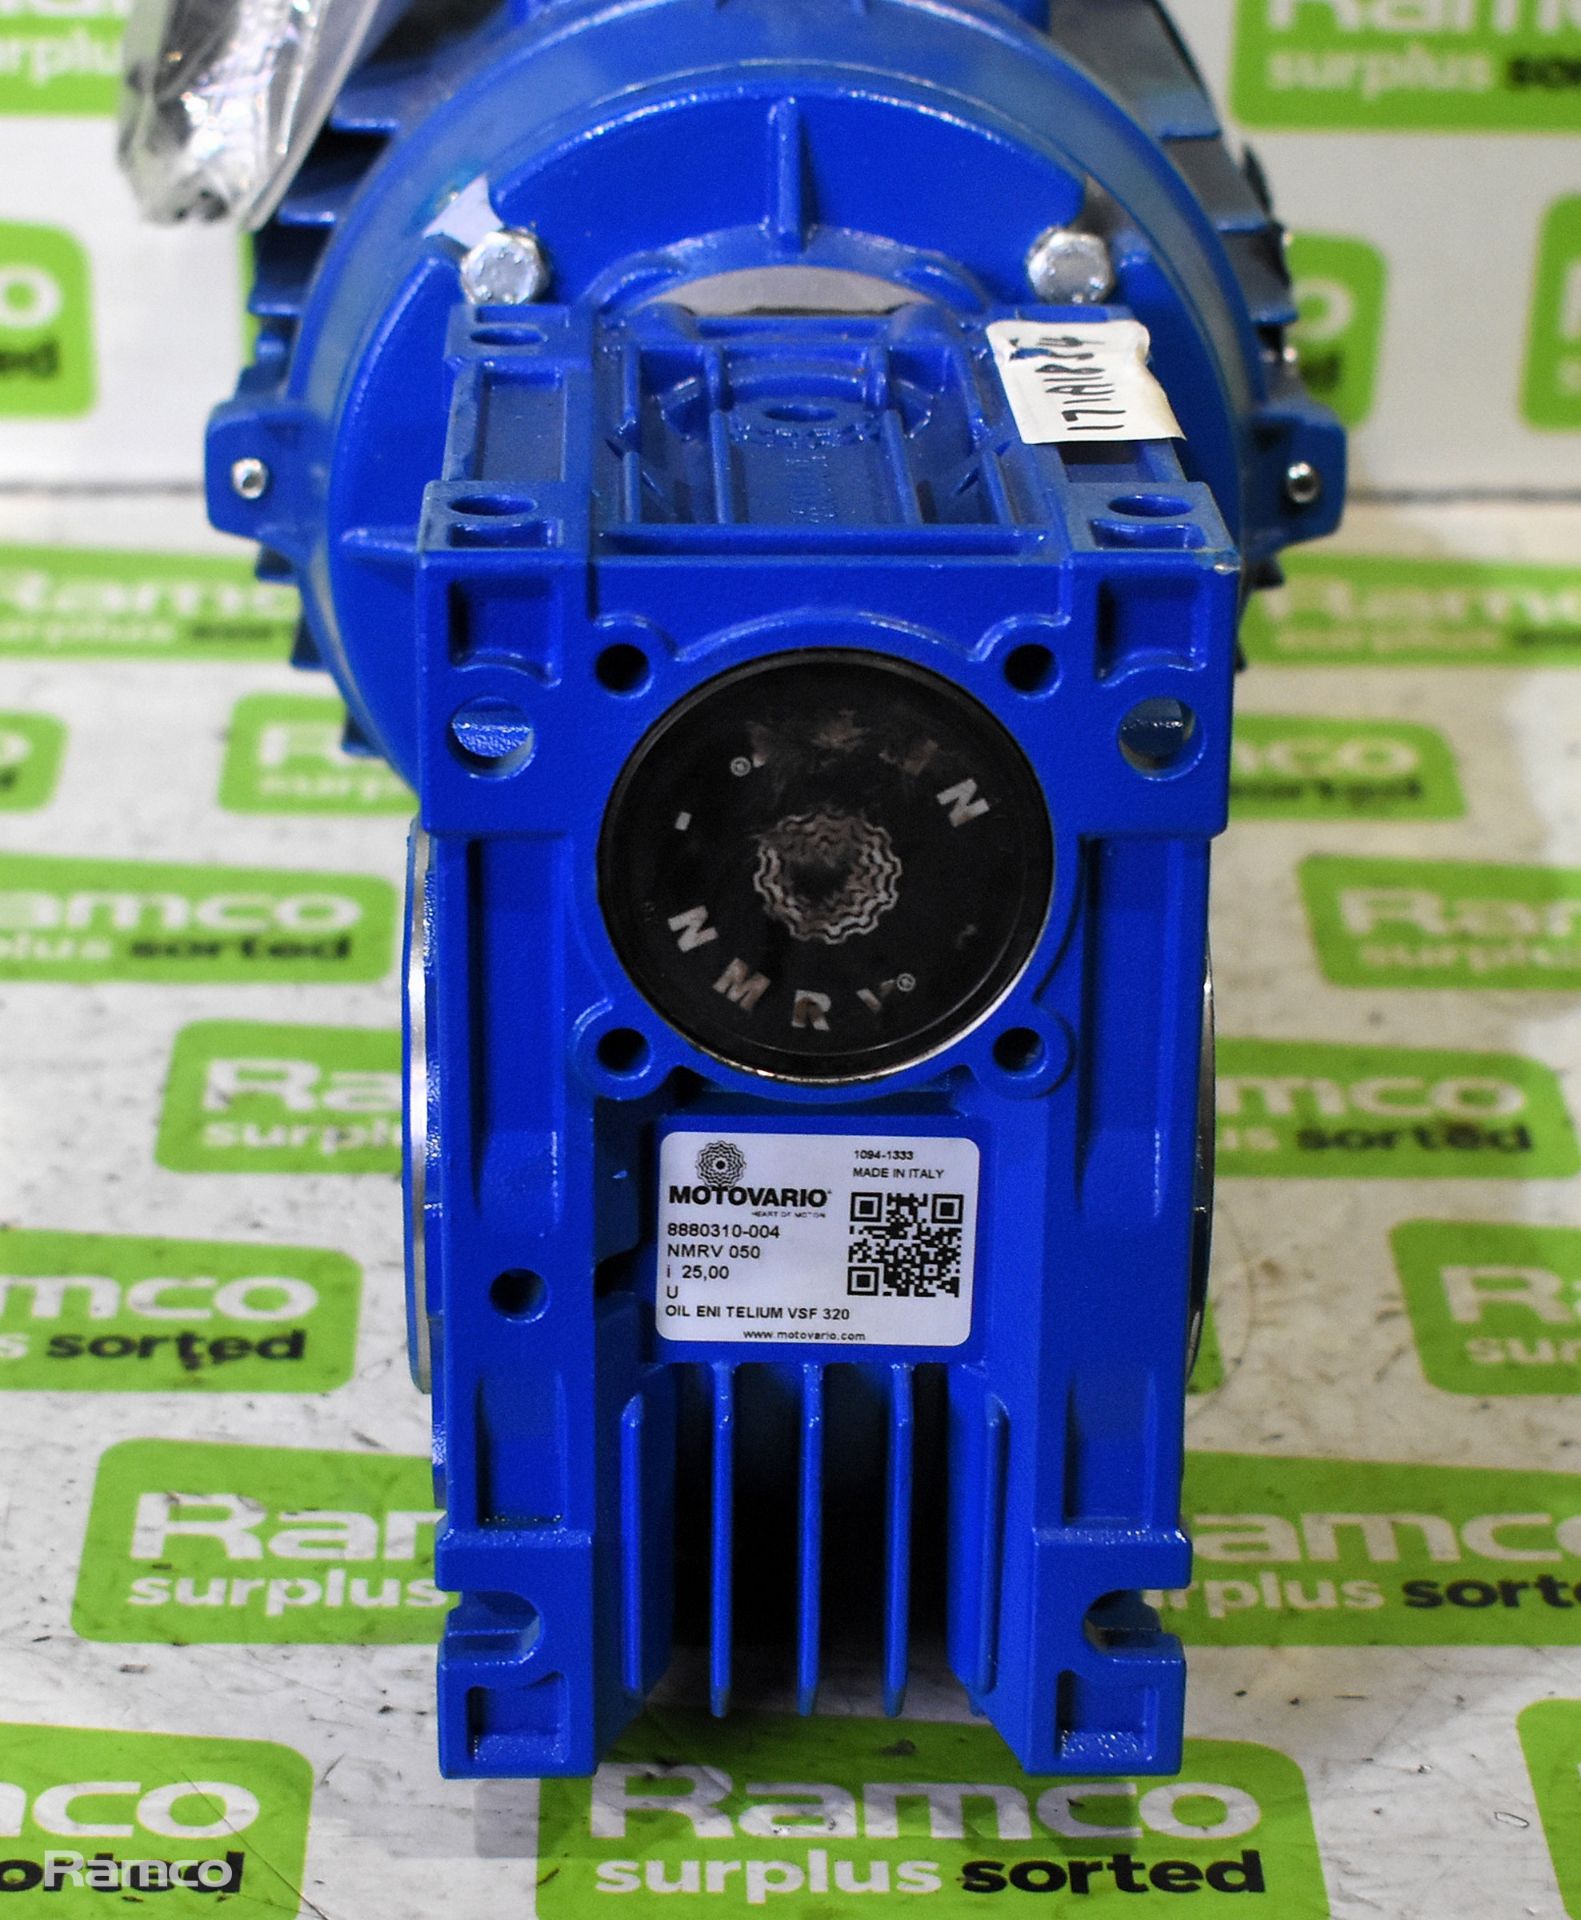 Motovario TH80A4 3 phase electric motor with Motovario NMRV 050 worm gearbox - Image 4 of 5